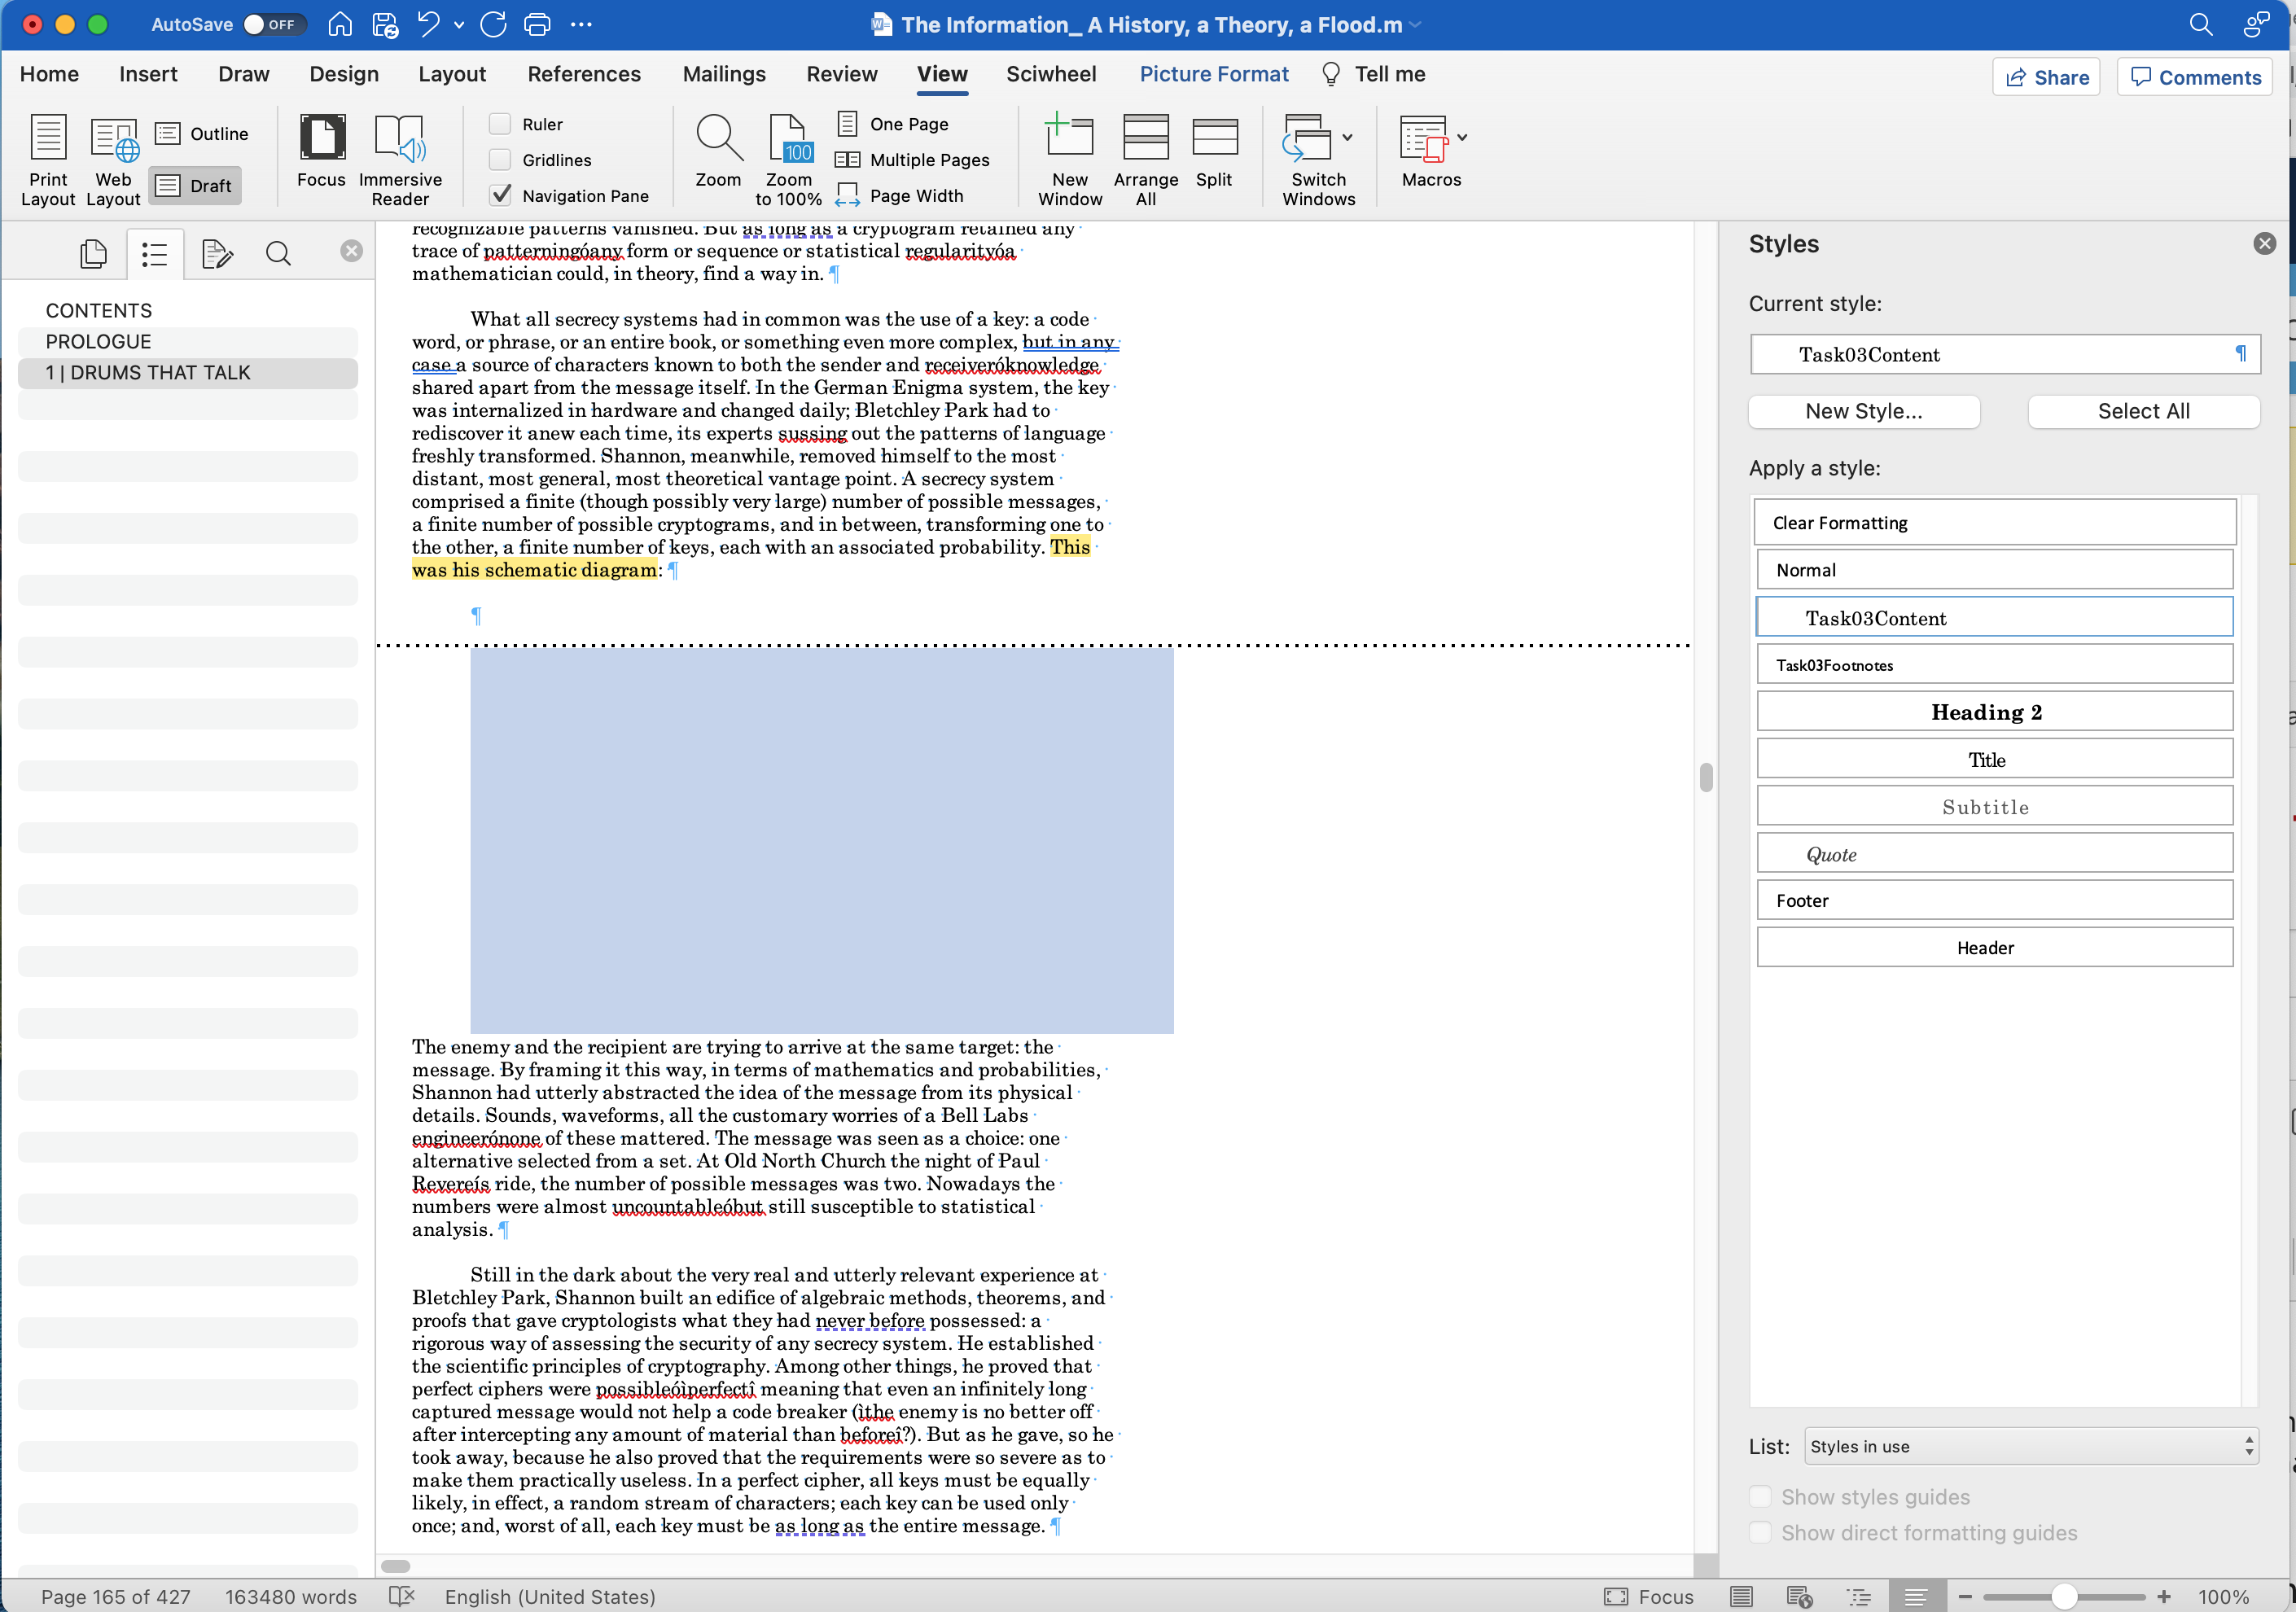 [MSWord 365 showing image inserted as in line with text mac]